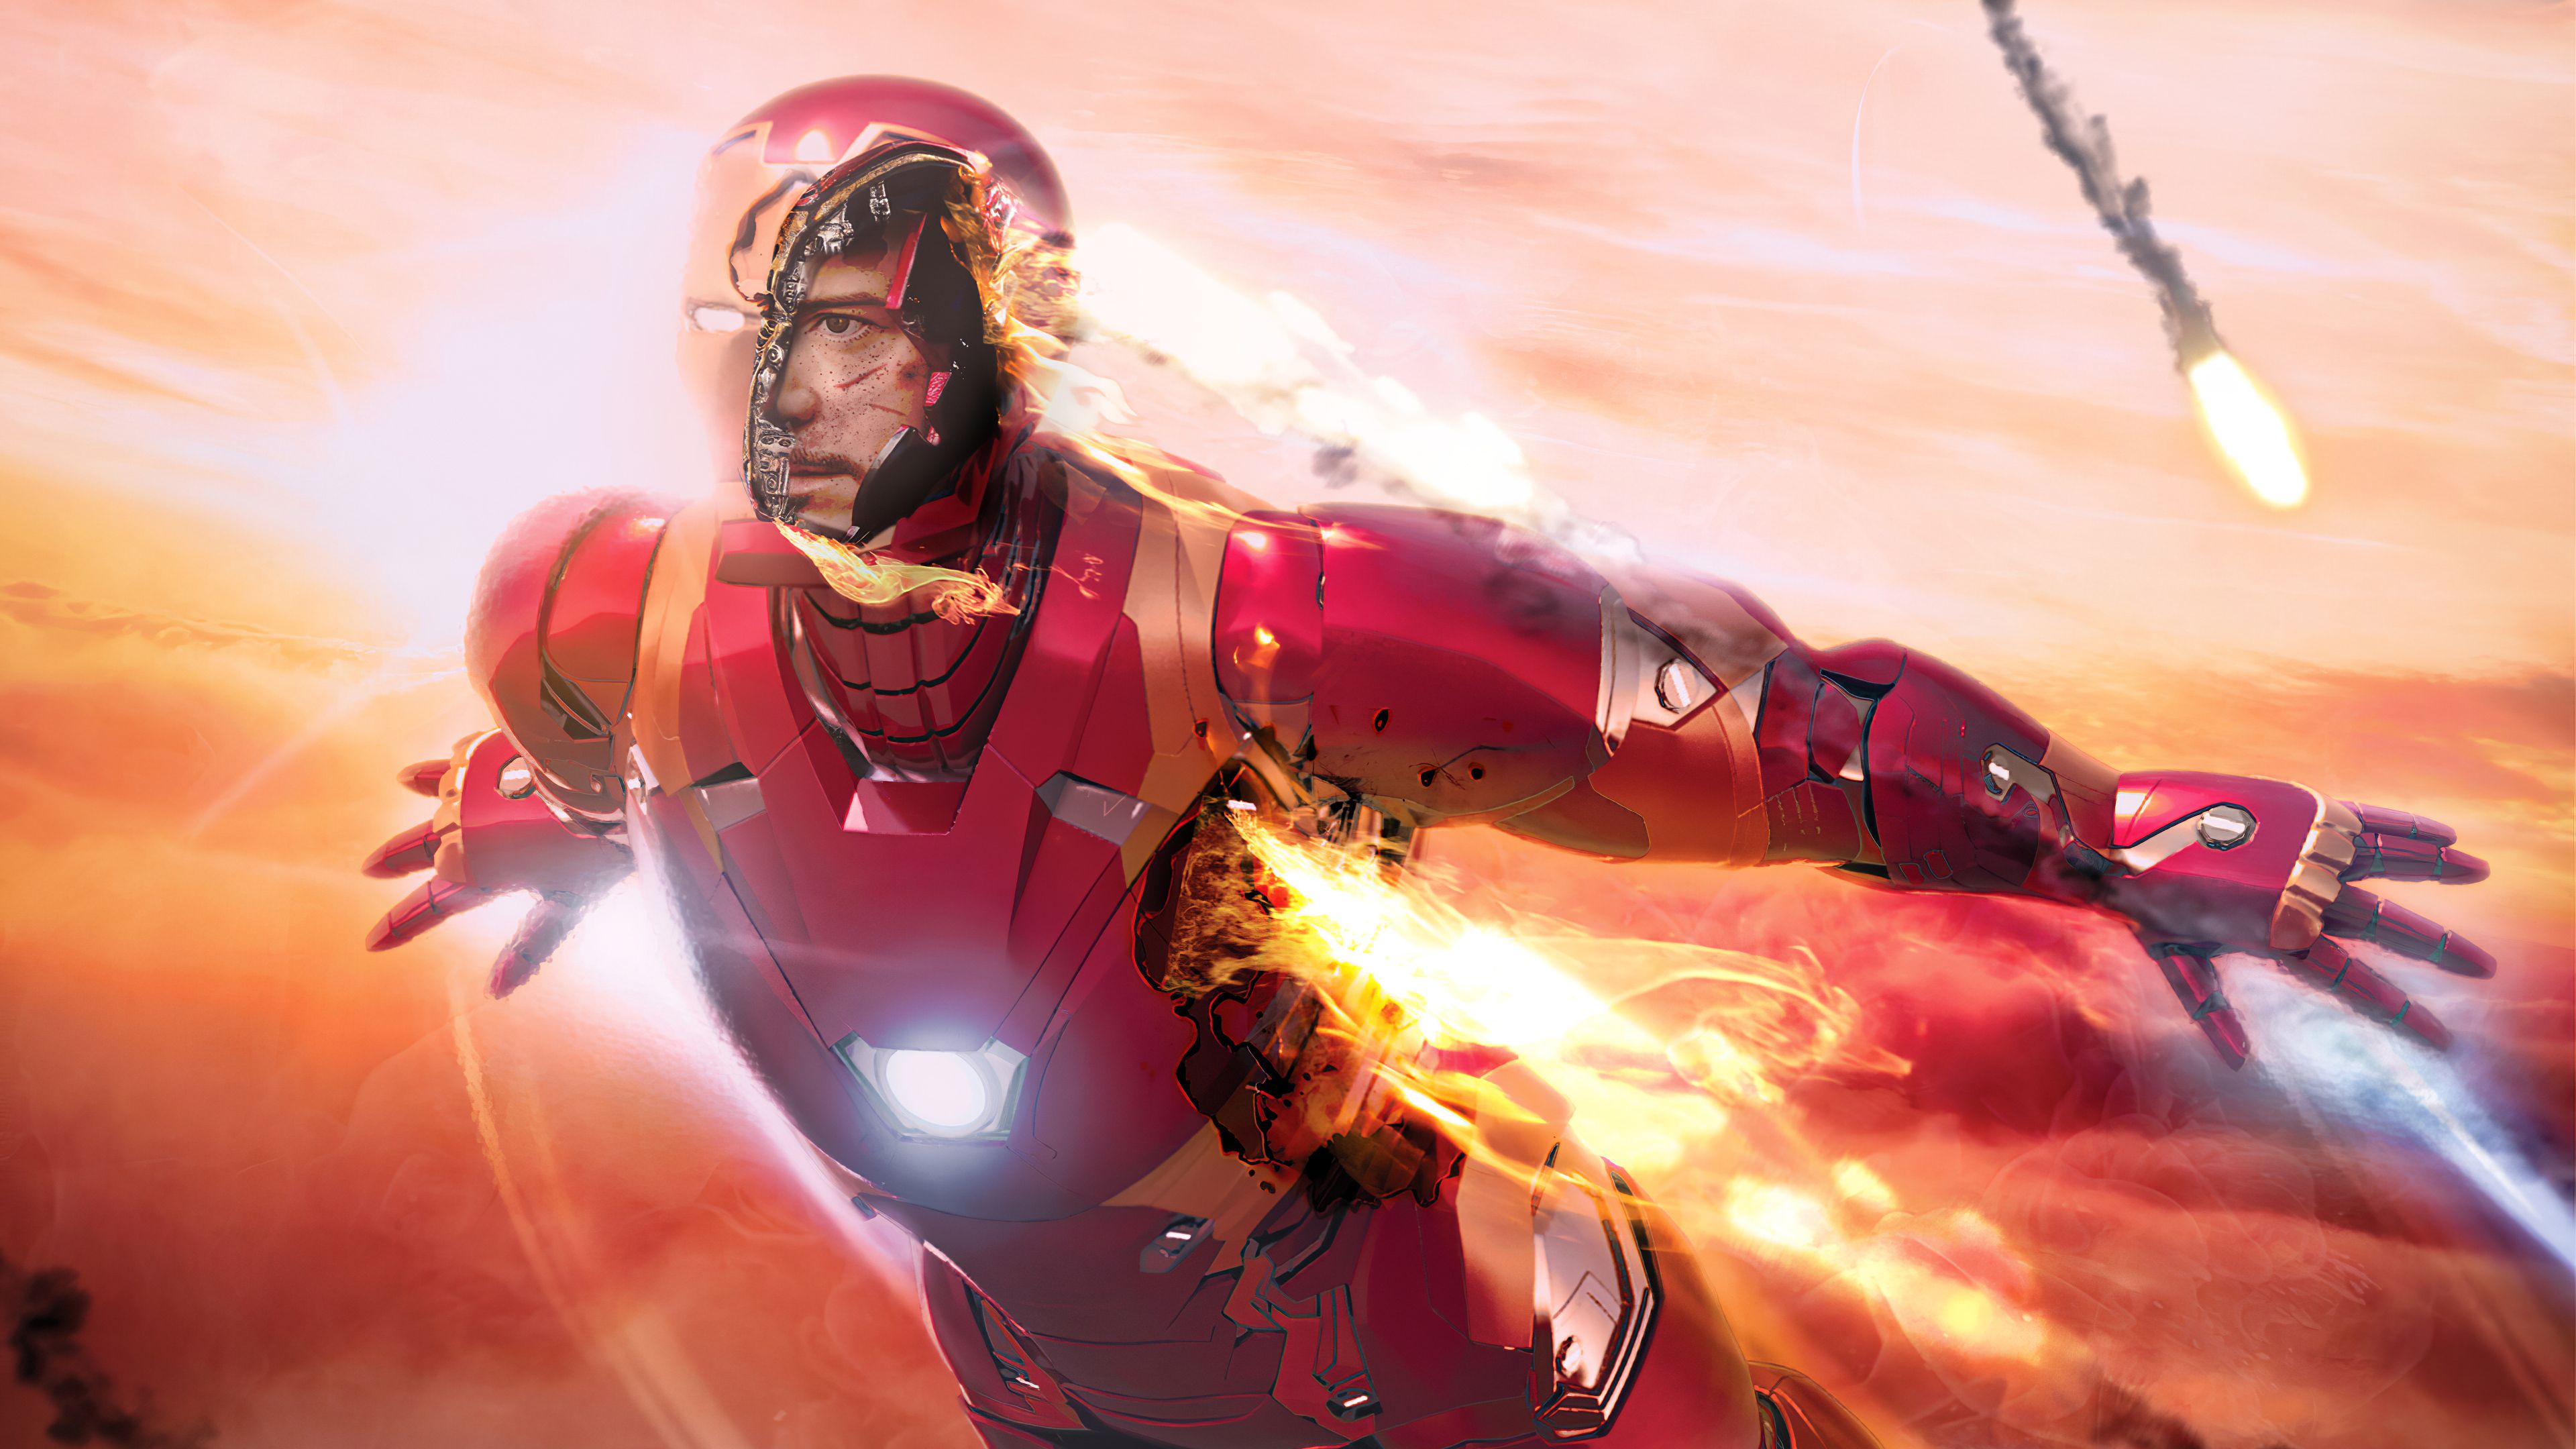 Iron Man Flying iPhone Wallpaper  iPhone Wallpapers